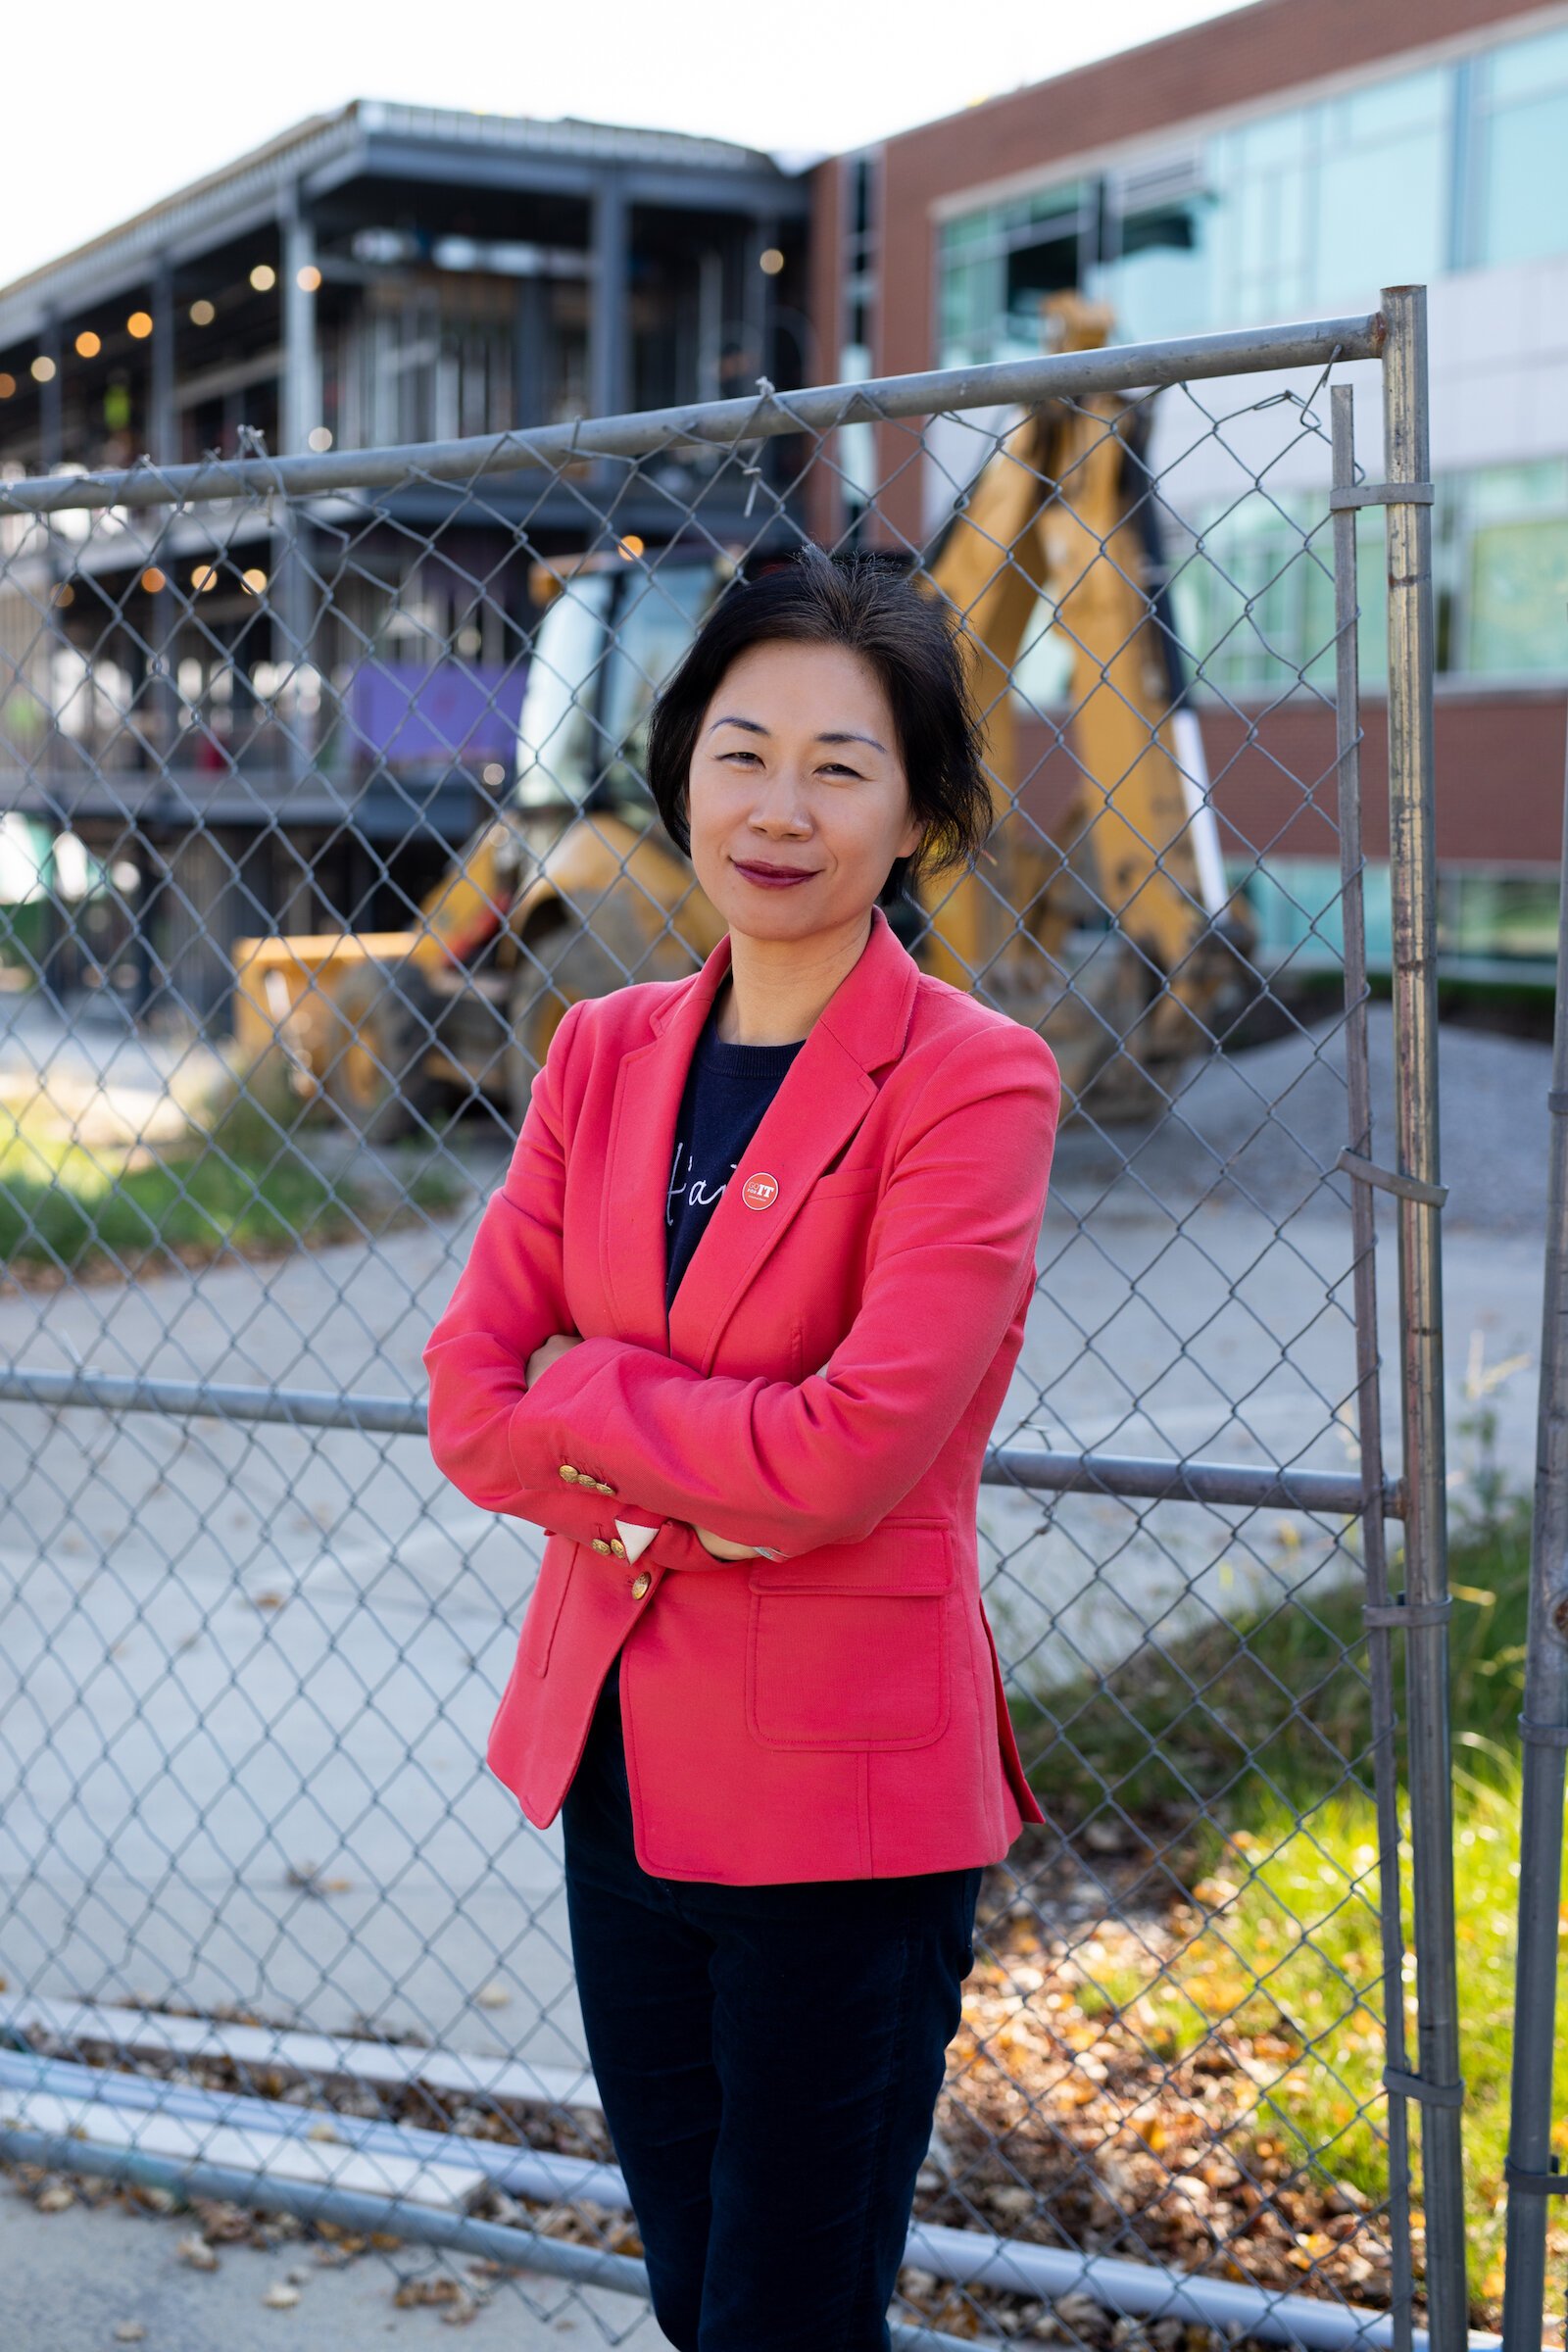 Dr. Ying Dr. Ying Shang stands in front of the Zollner Engineering Center at Indiana Tech, which is under construction to double its size.